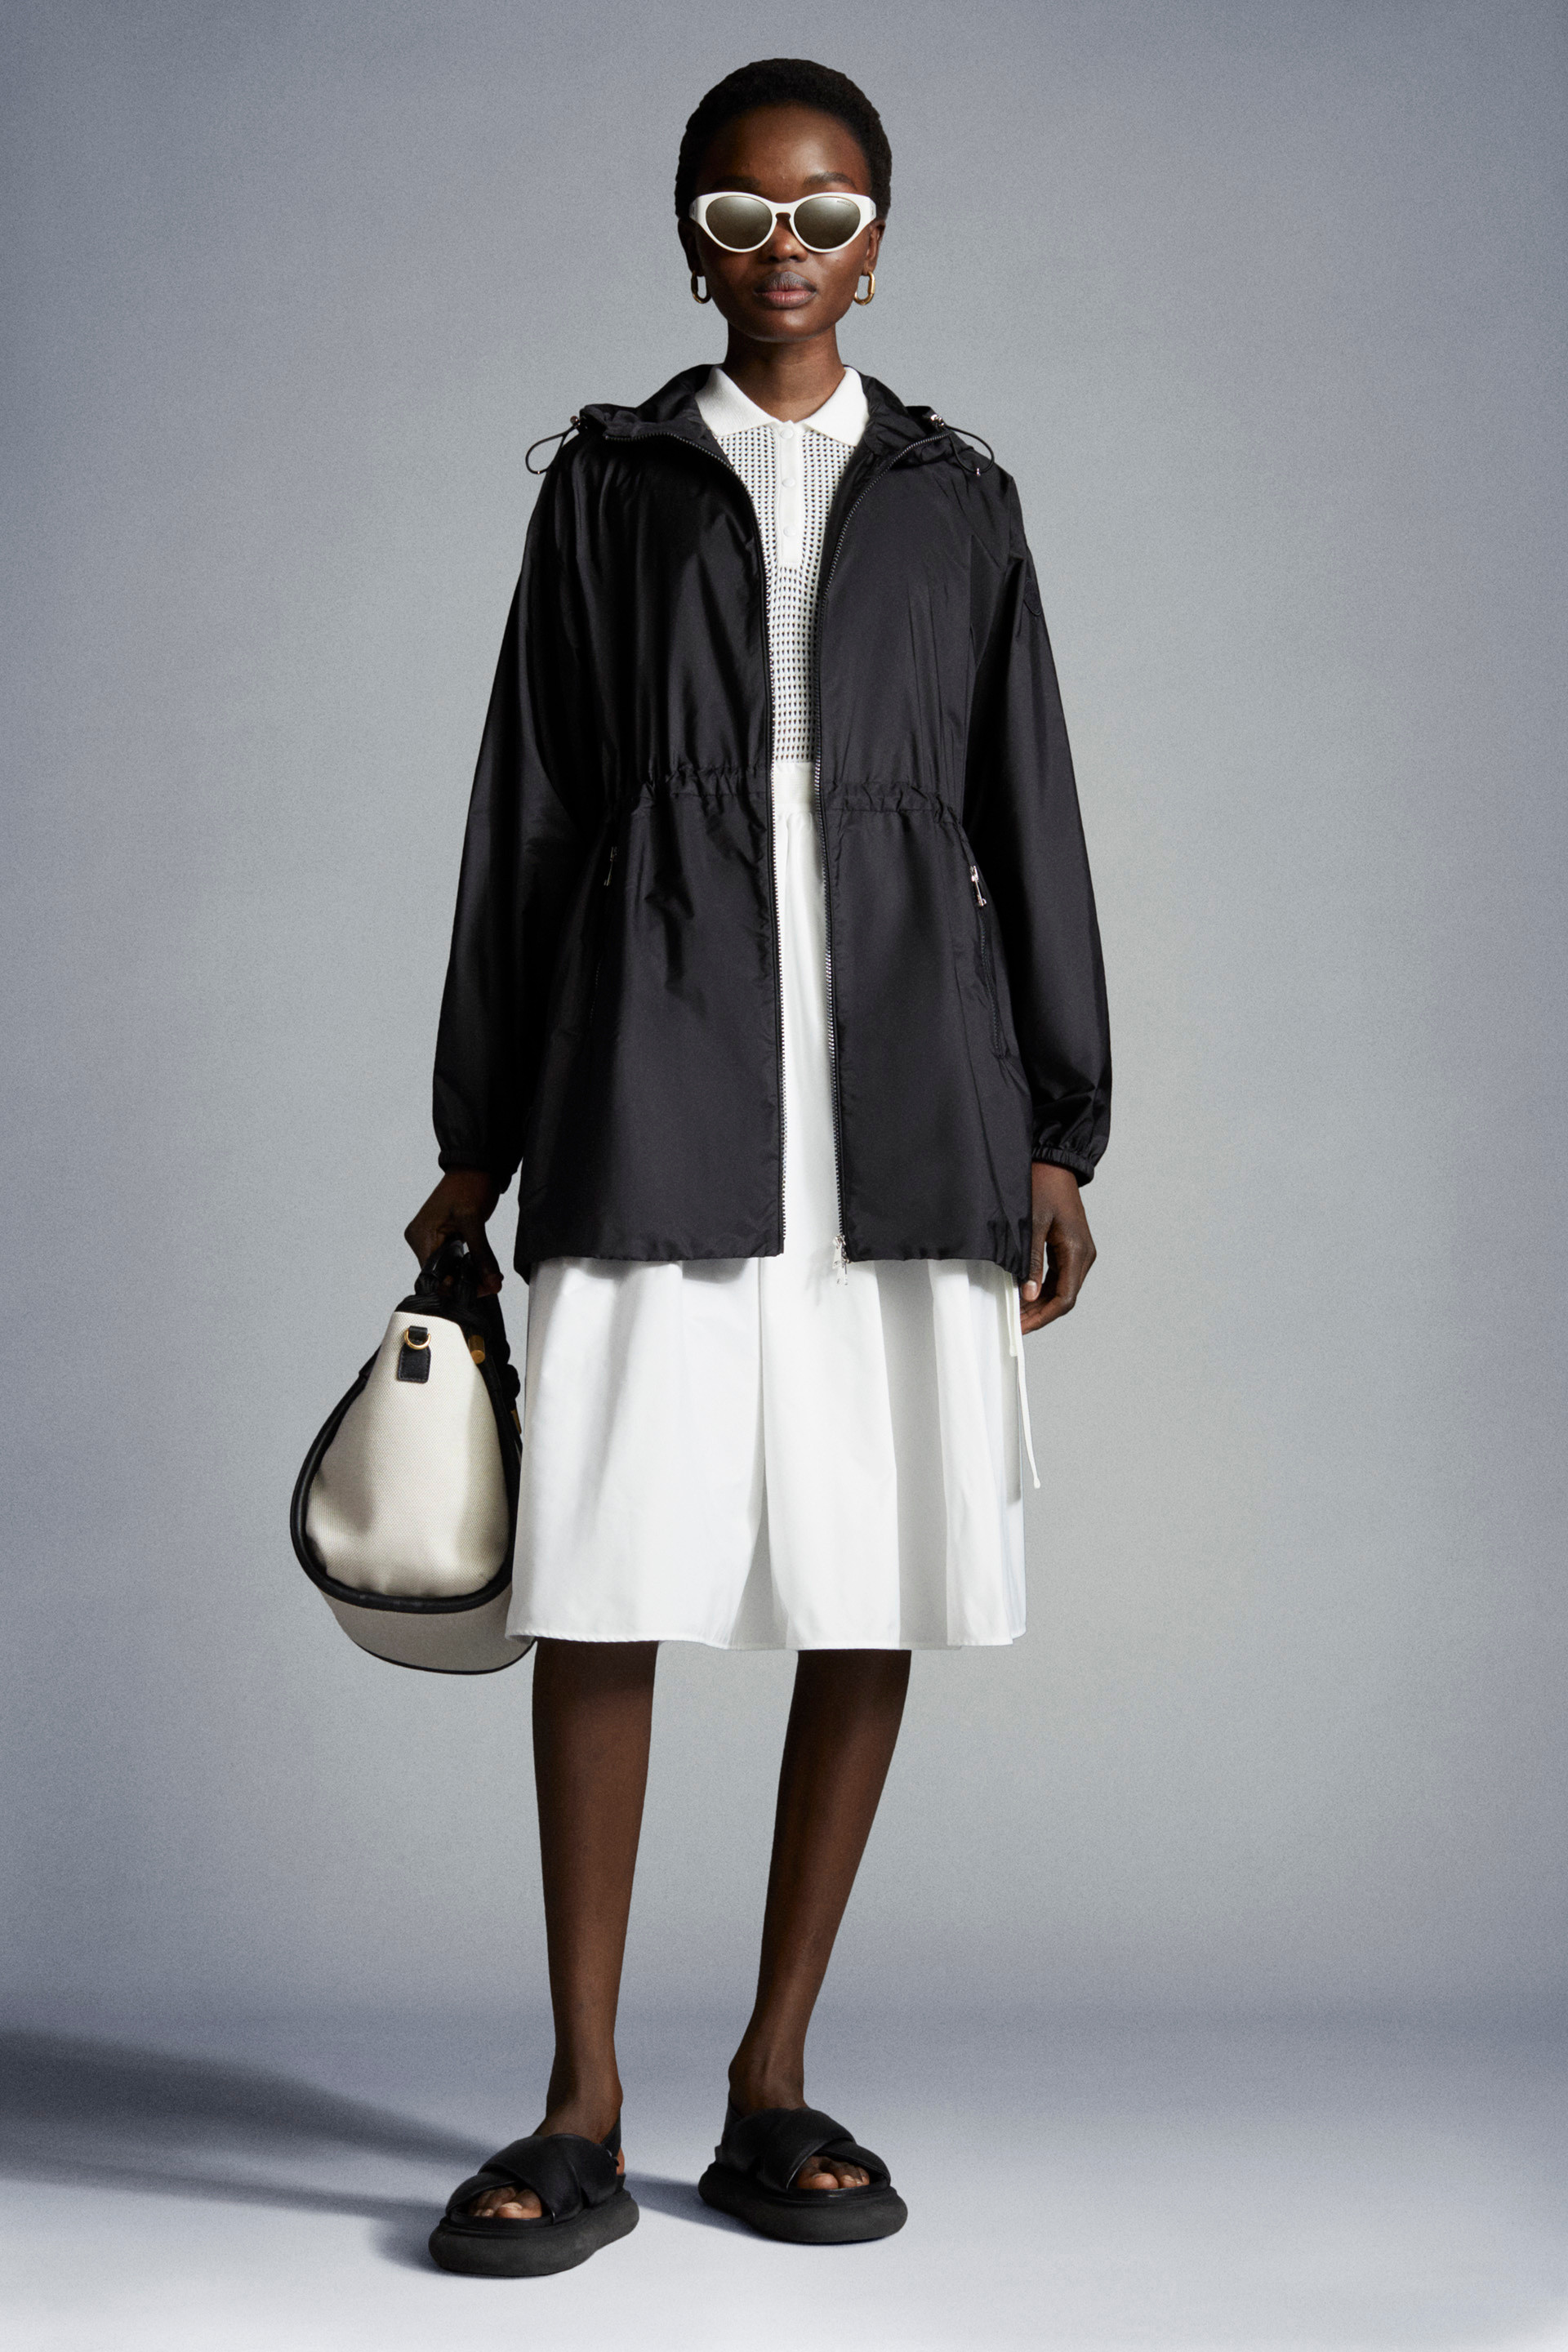 All Outerwear for Women - Outerwear | Moncler IT